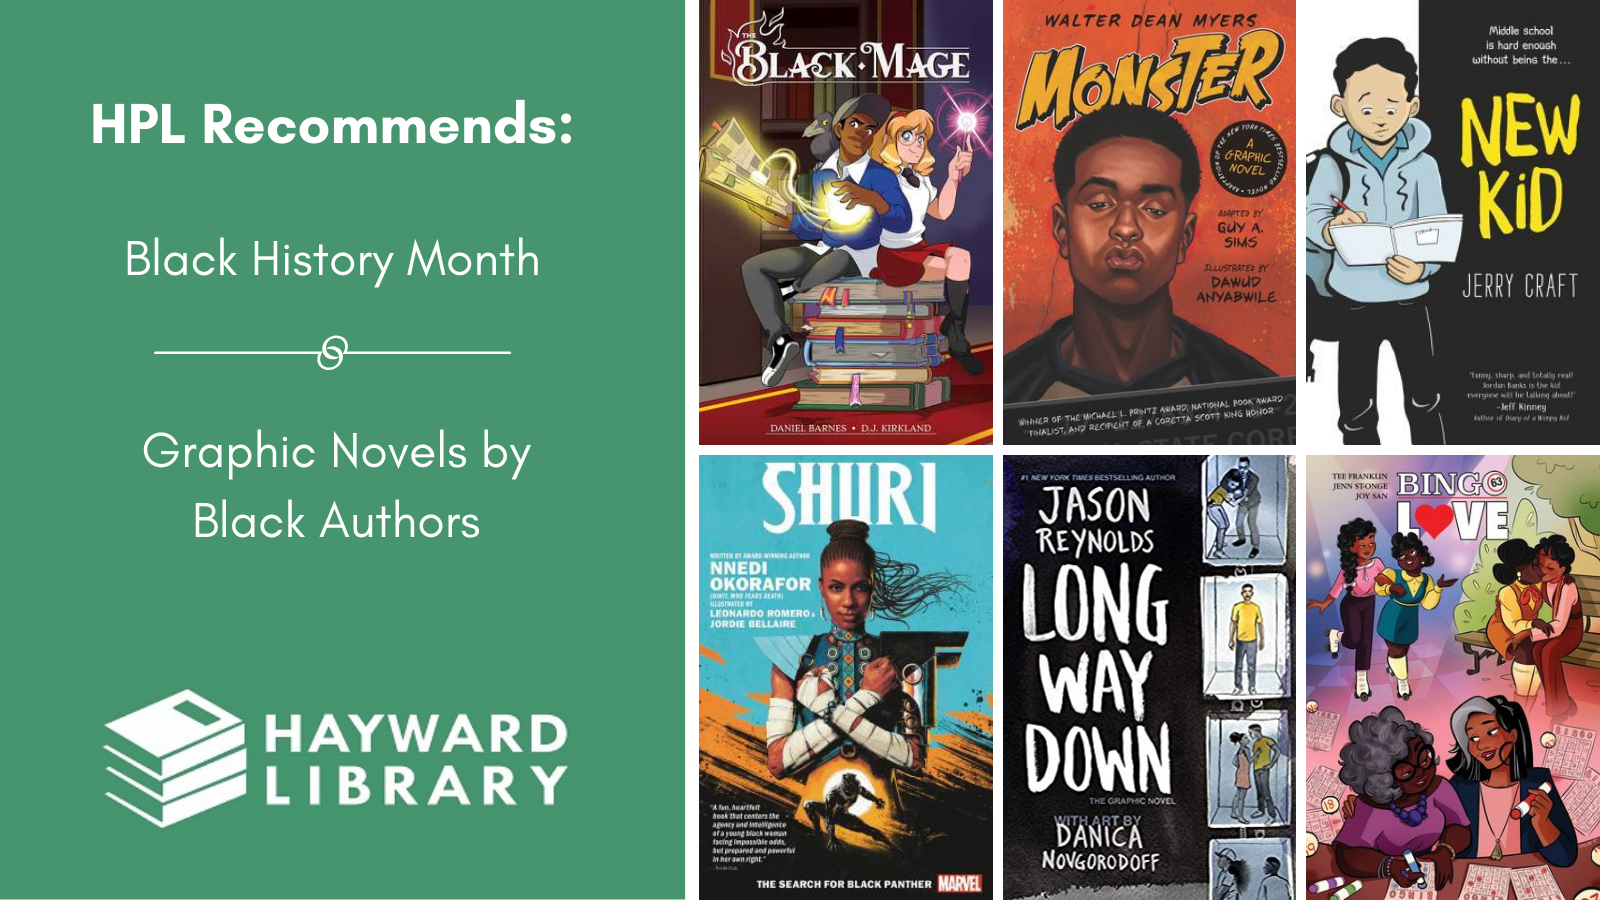 Collage of book covers with a green block on left side that says HPL Recommends, Black History Month, Graphic Novels by Black Authors in white text, with Hayward Library logo below it.